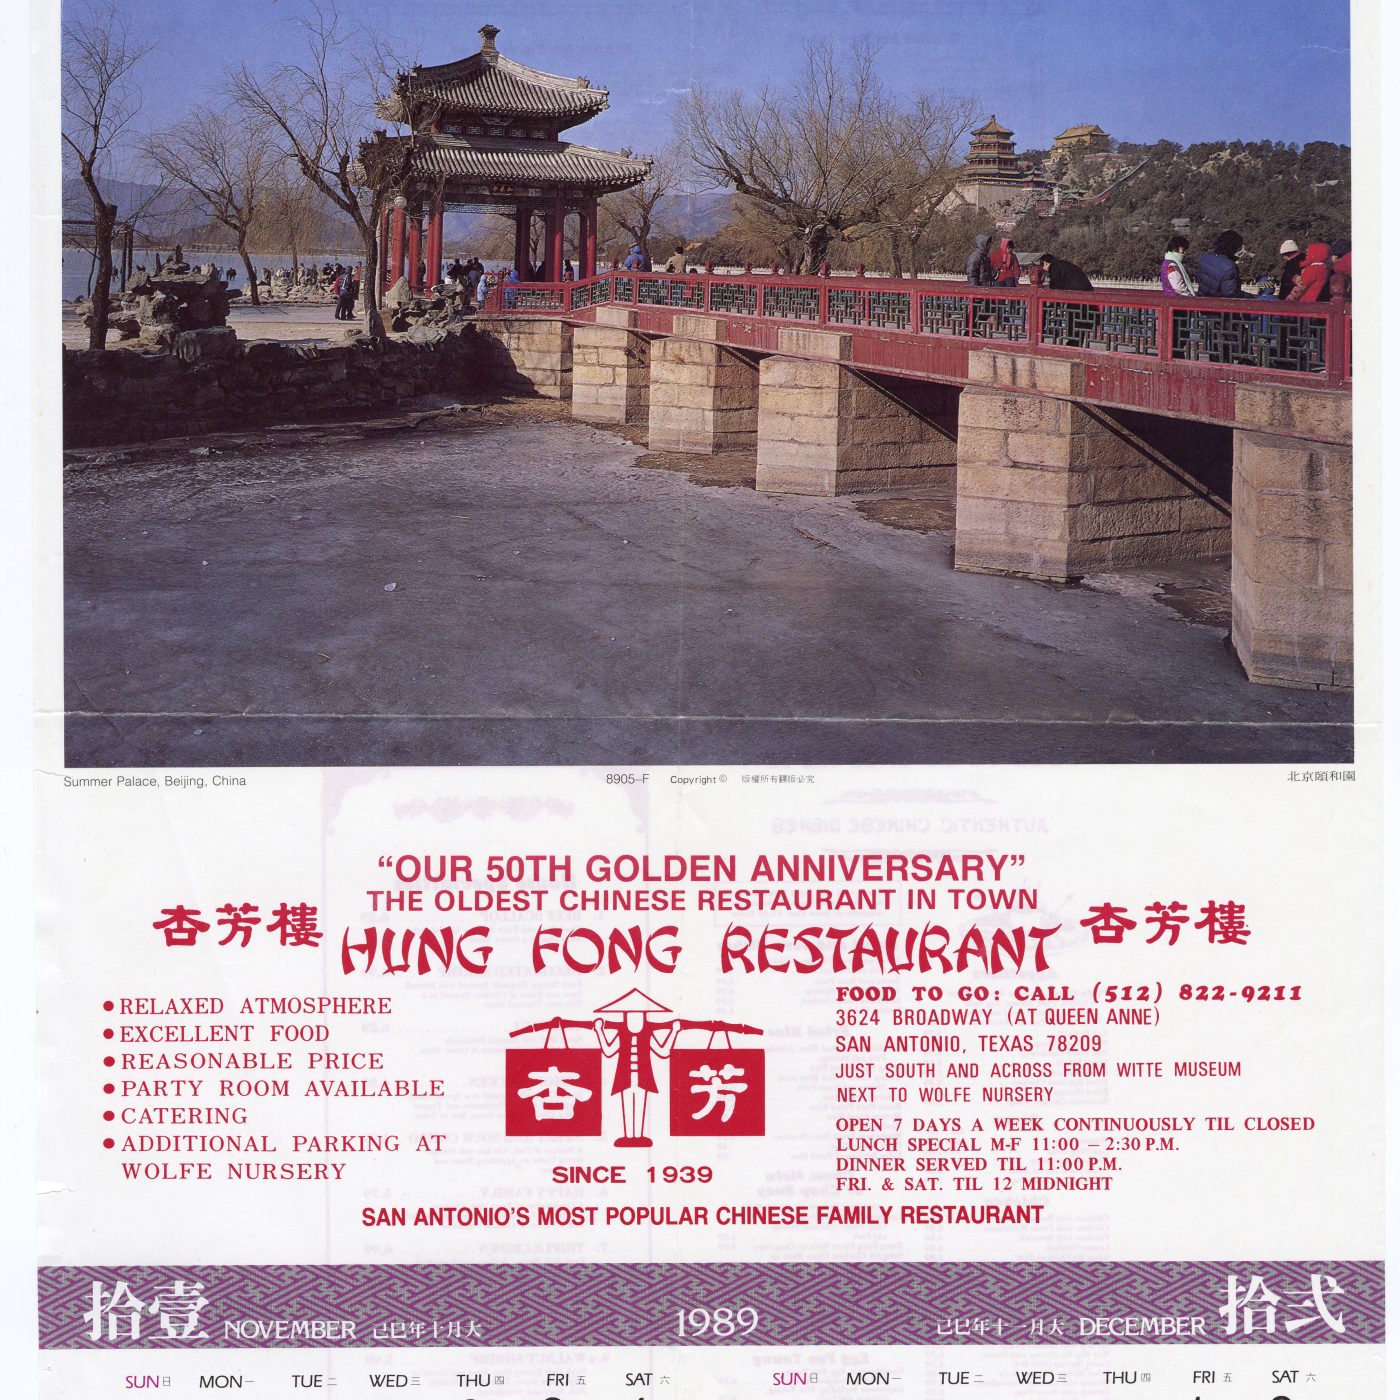 Hung Fong Restaurant menu front. Courtesy of University of Toronto Scarborough Library. Museum of Chinese in America (MOCA) Collection.